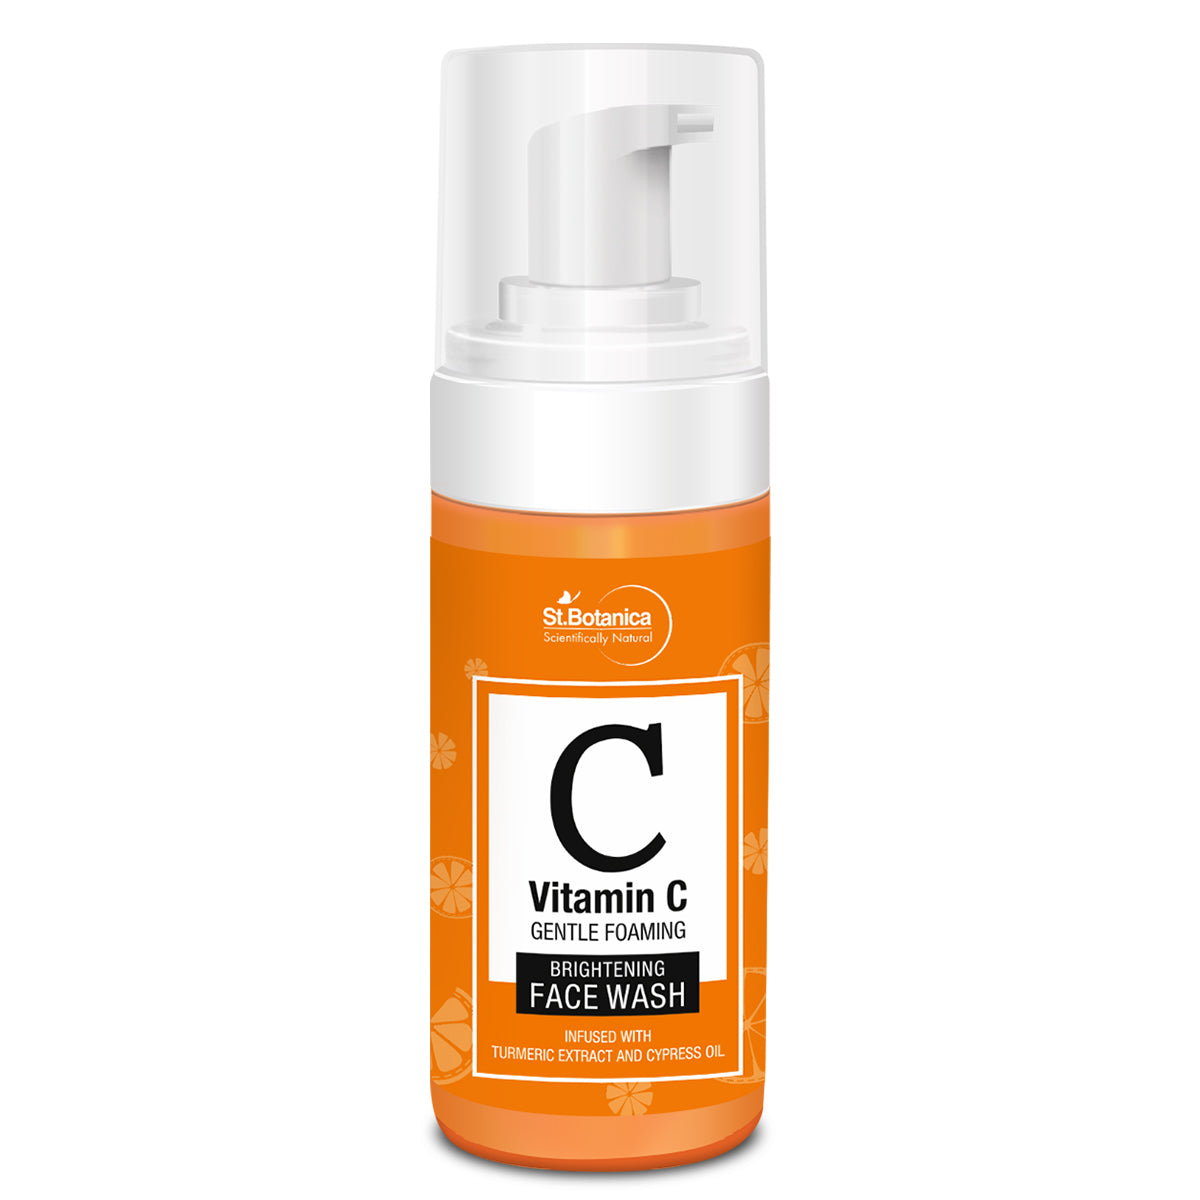 St.Botanica Vitamin C Foaming Brightening Face Wash - No Parabens, Sulphate, Silicones, 120 ml